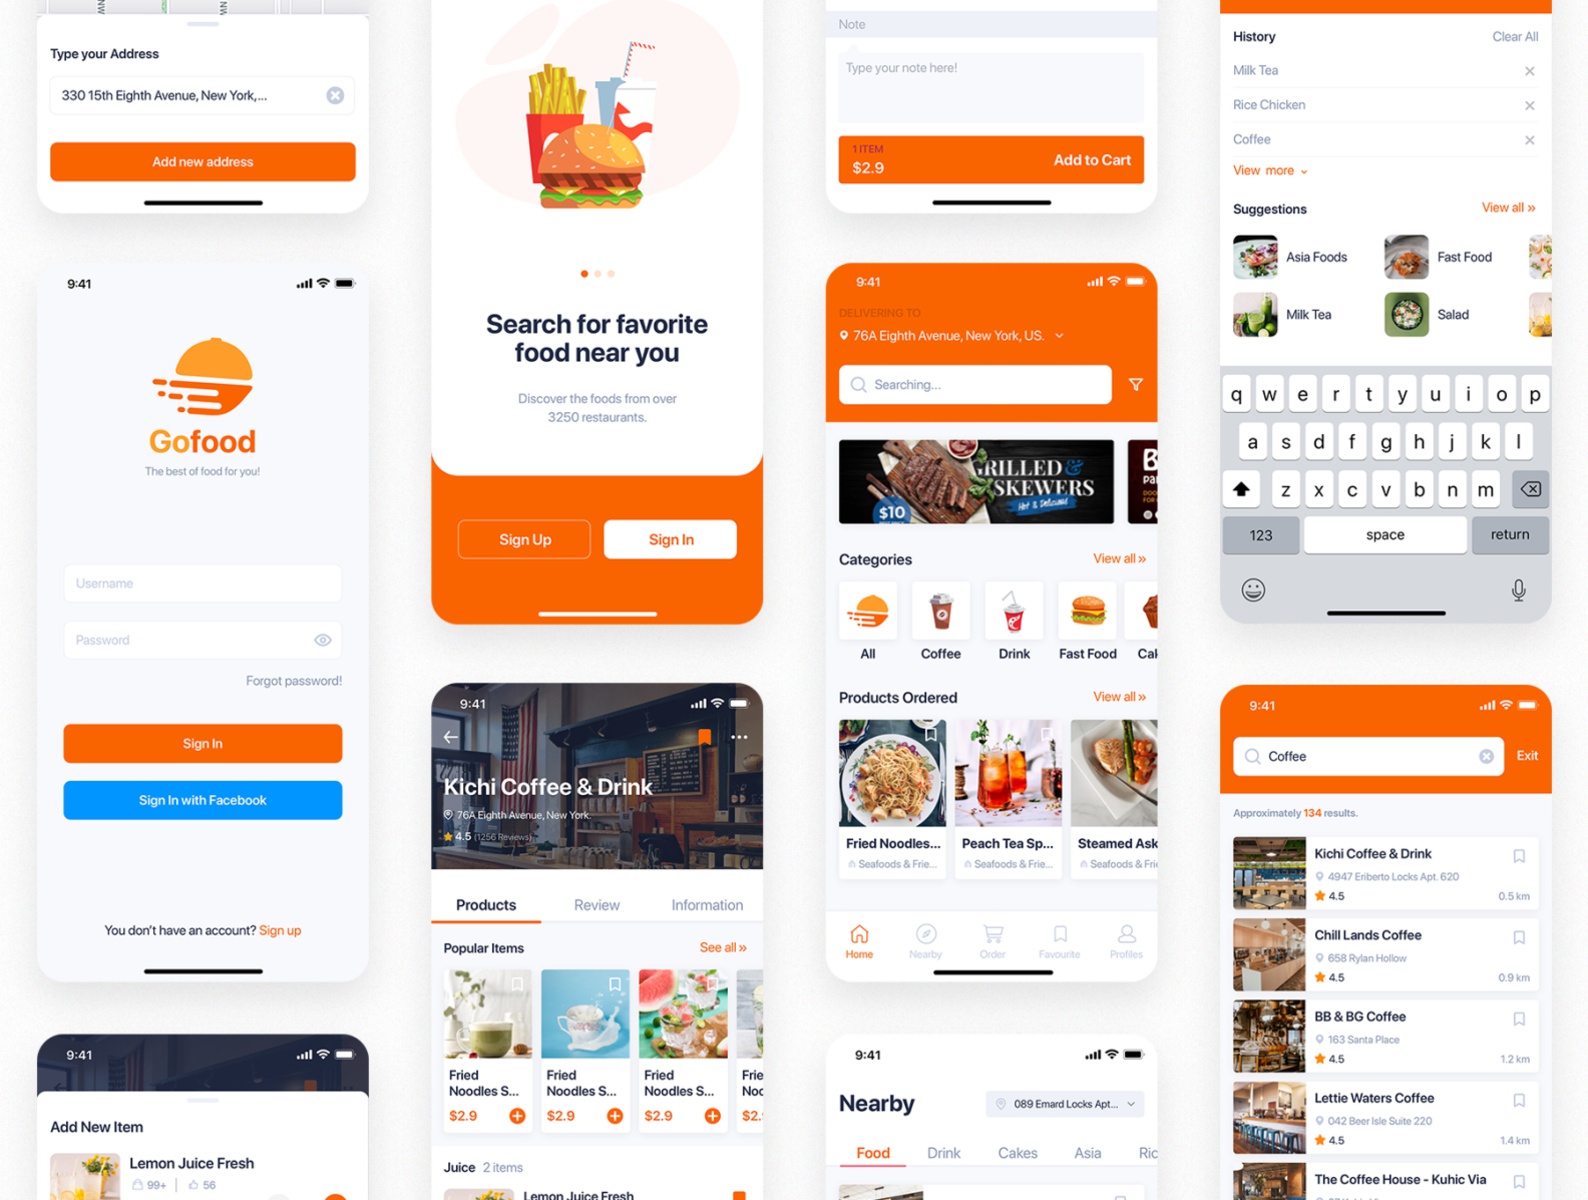 GonEats - Food Delivery UI Kit